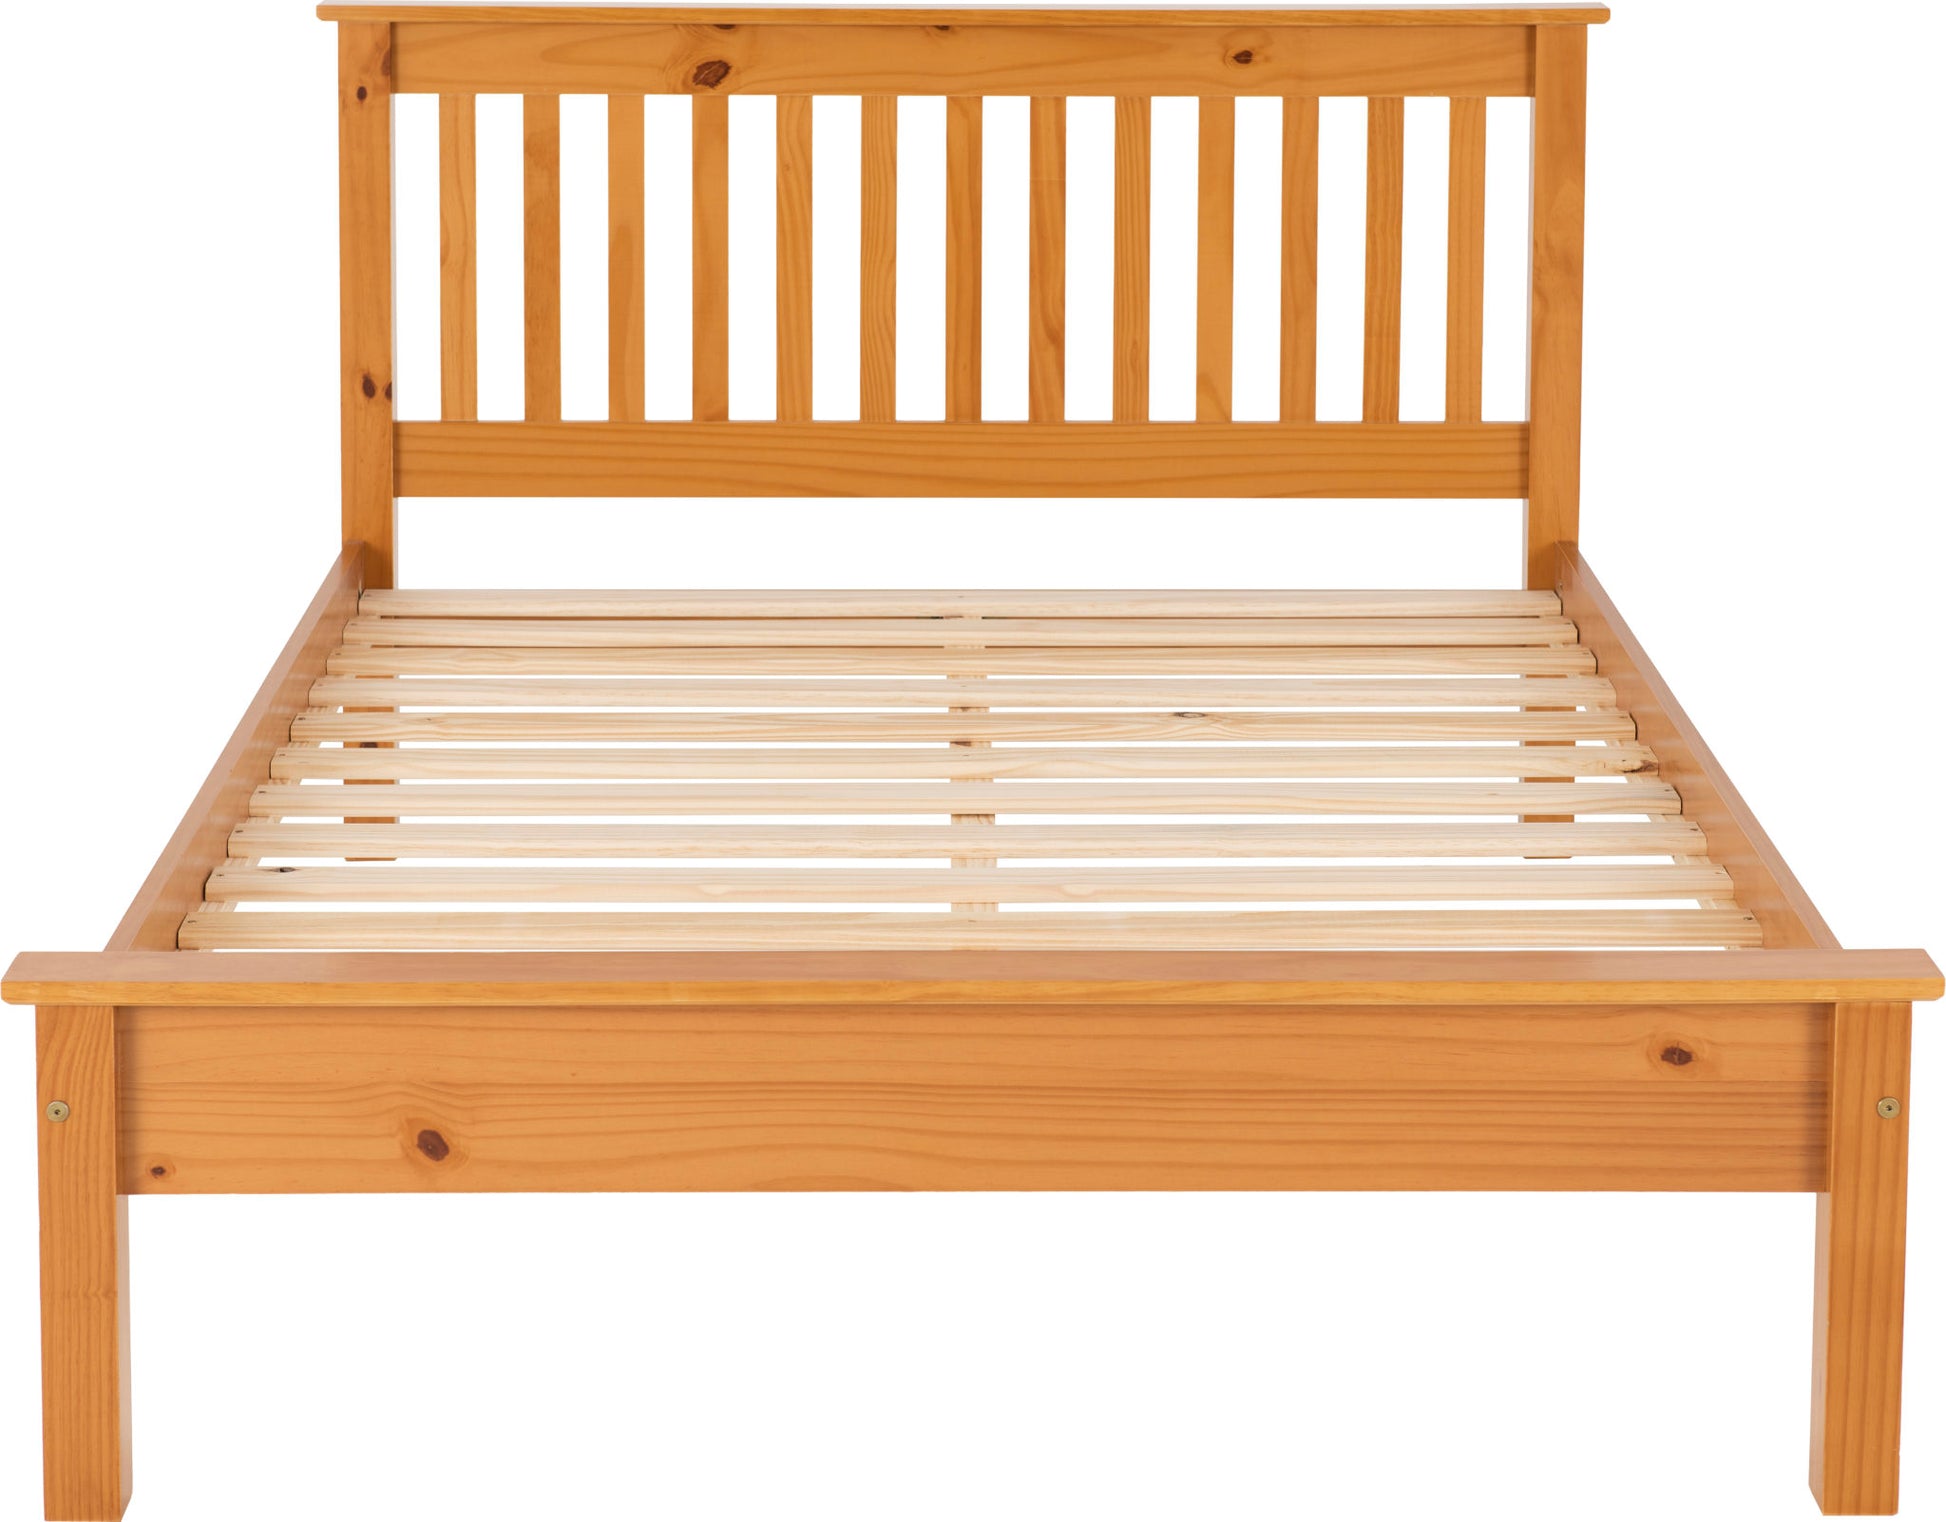 MONACO-46-LOW-END-BED-ANTIQUE-PINE-2020-200-203-029-01-scaled.jpg